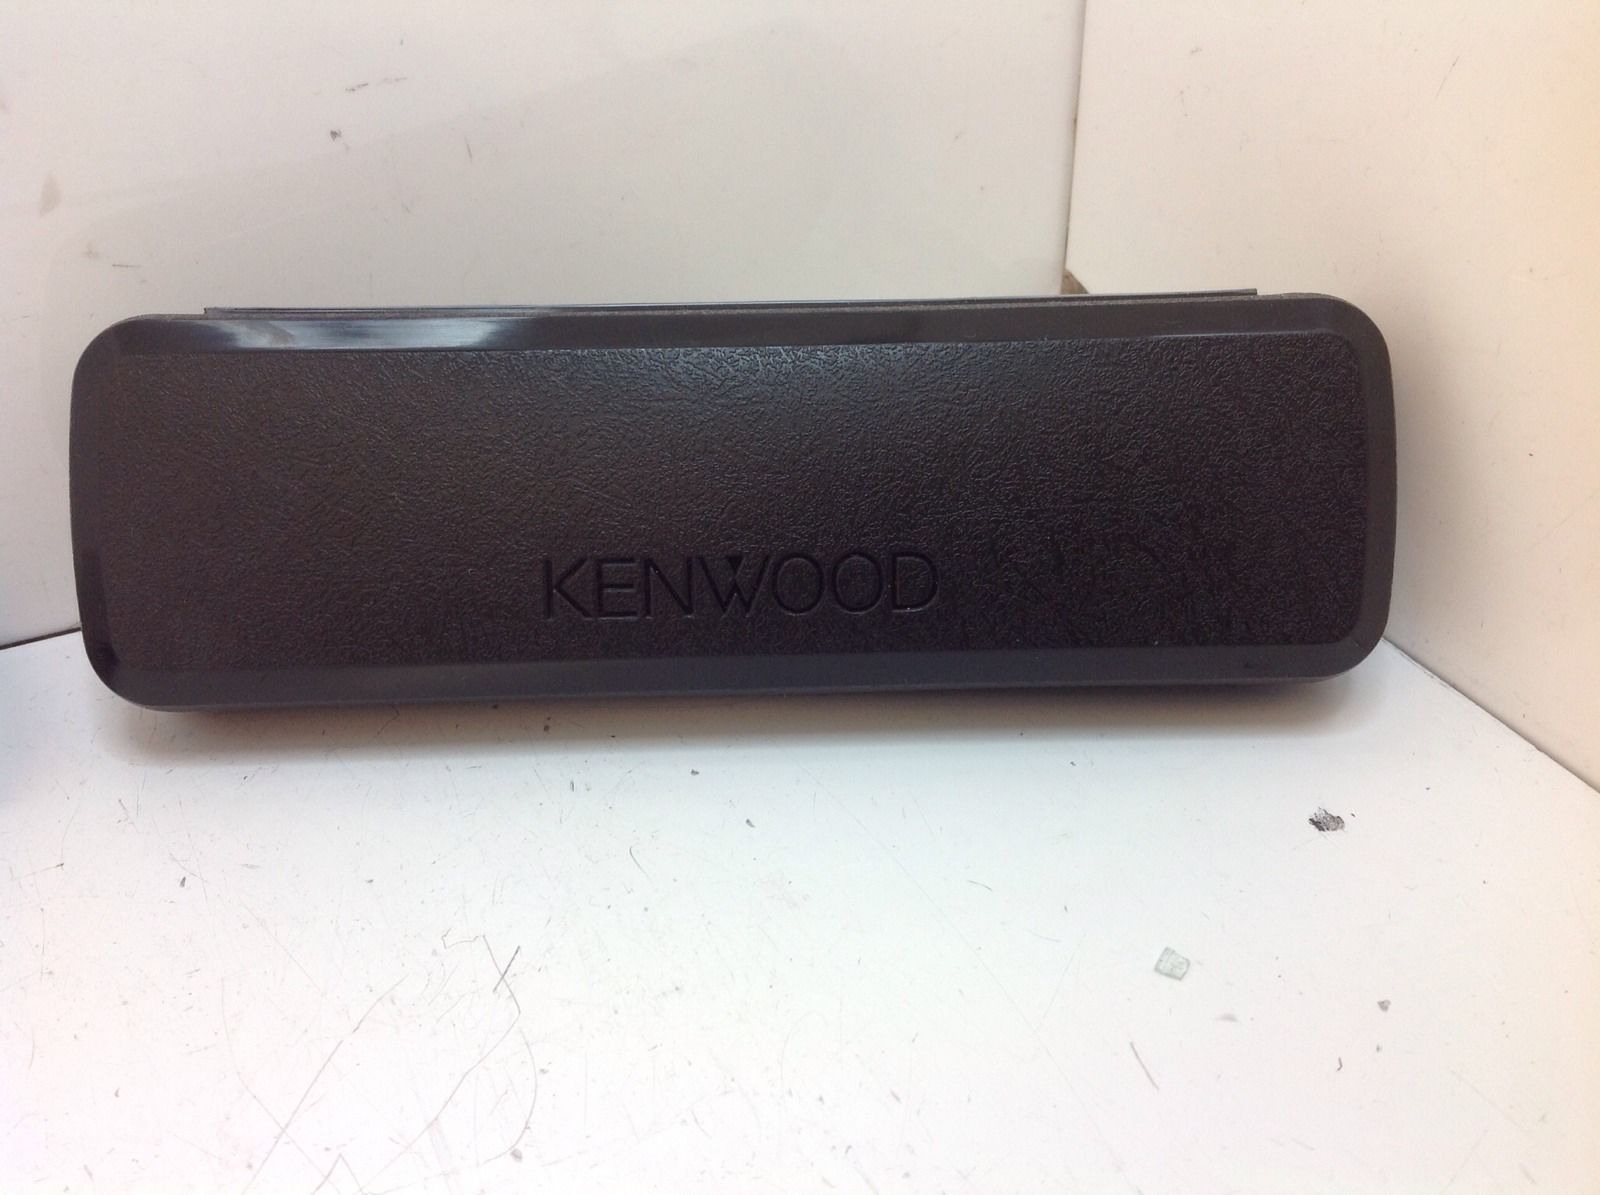 Kenwood Krc-878r Krc878r brand new face front panel complete with new case